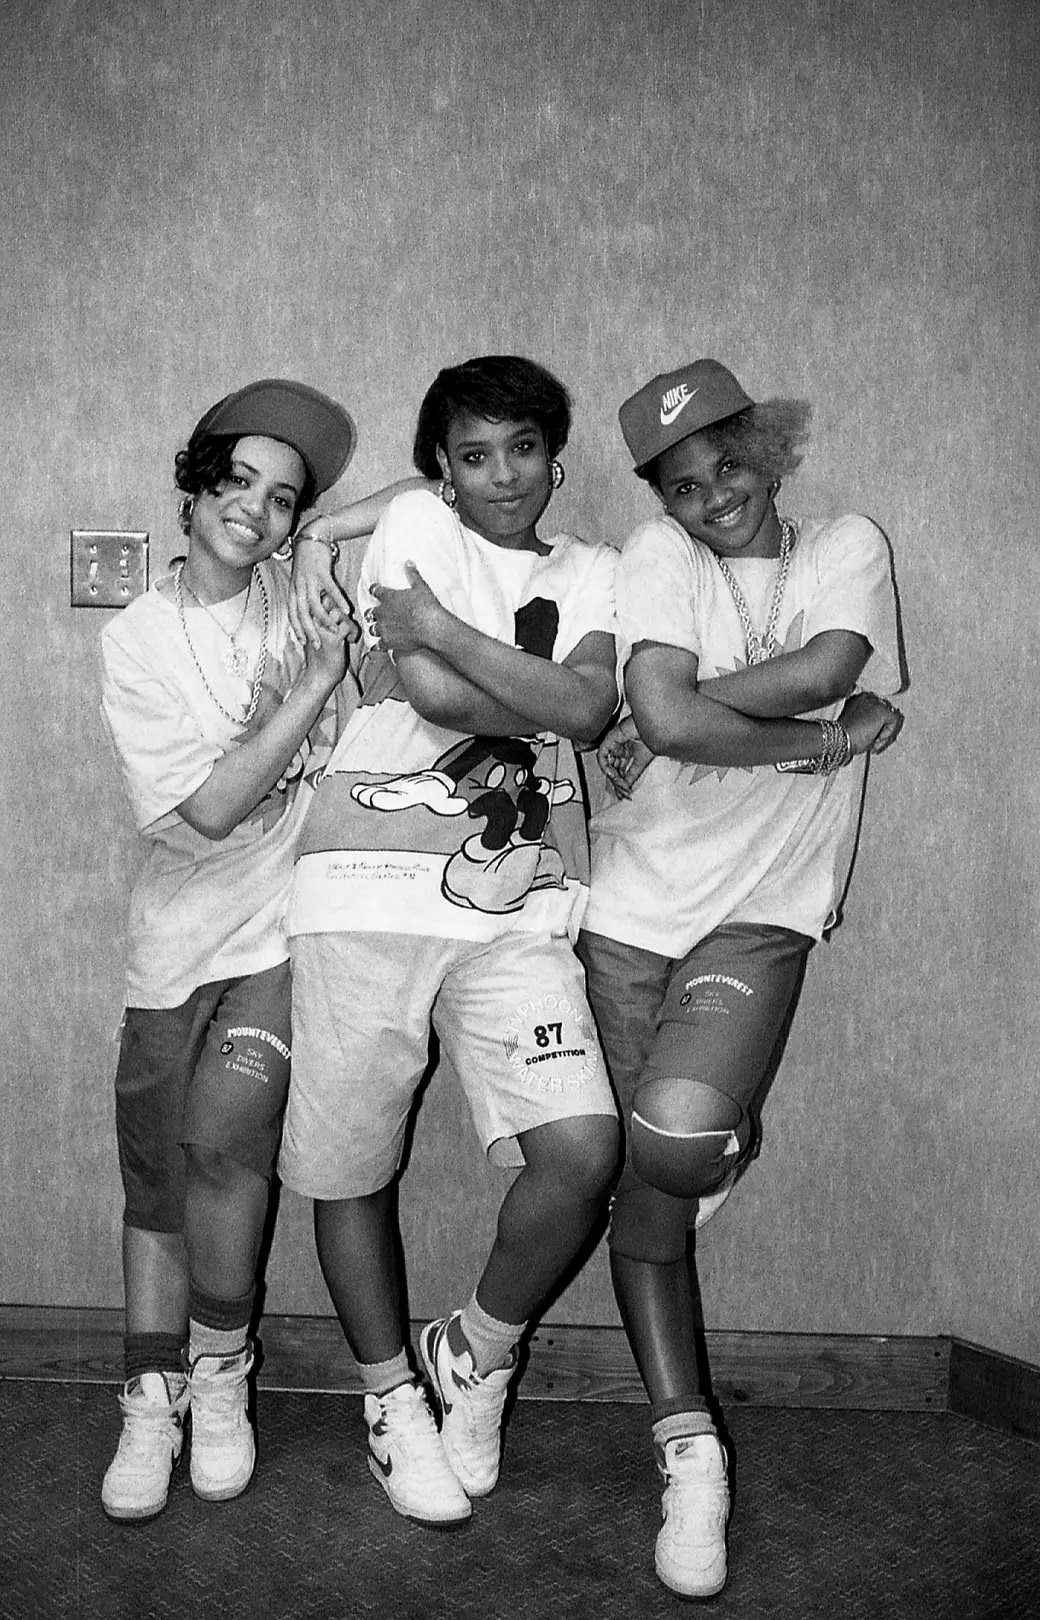 Salt, DJ Spinderella, and Pepa from Salt-N-Pepa pose for photos backstage at the Holiday Star Theatre in Merrillville, Indiana, in June 1987.